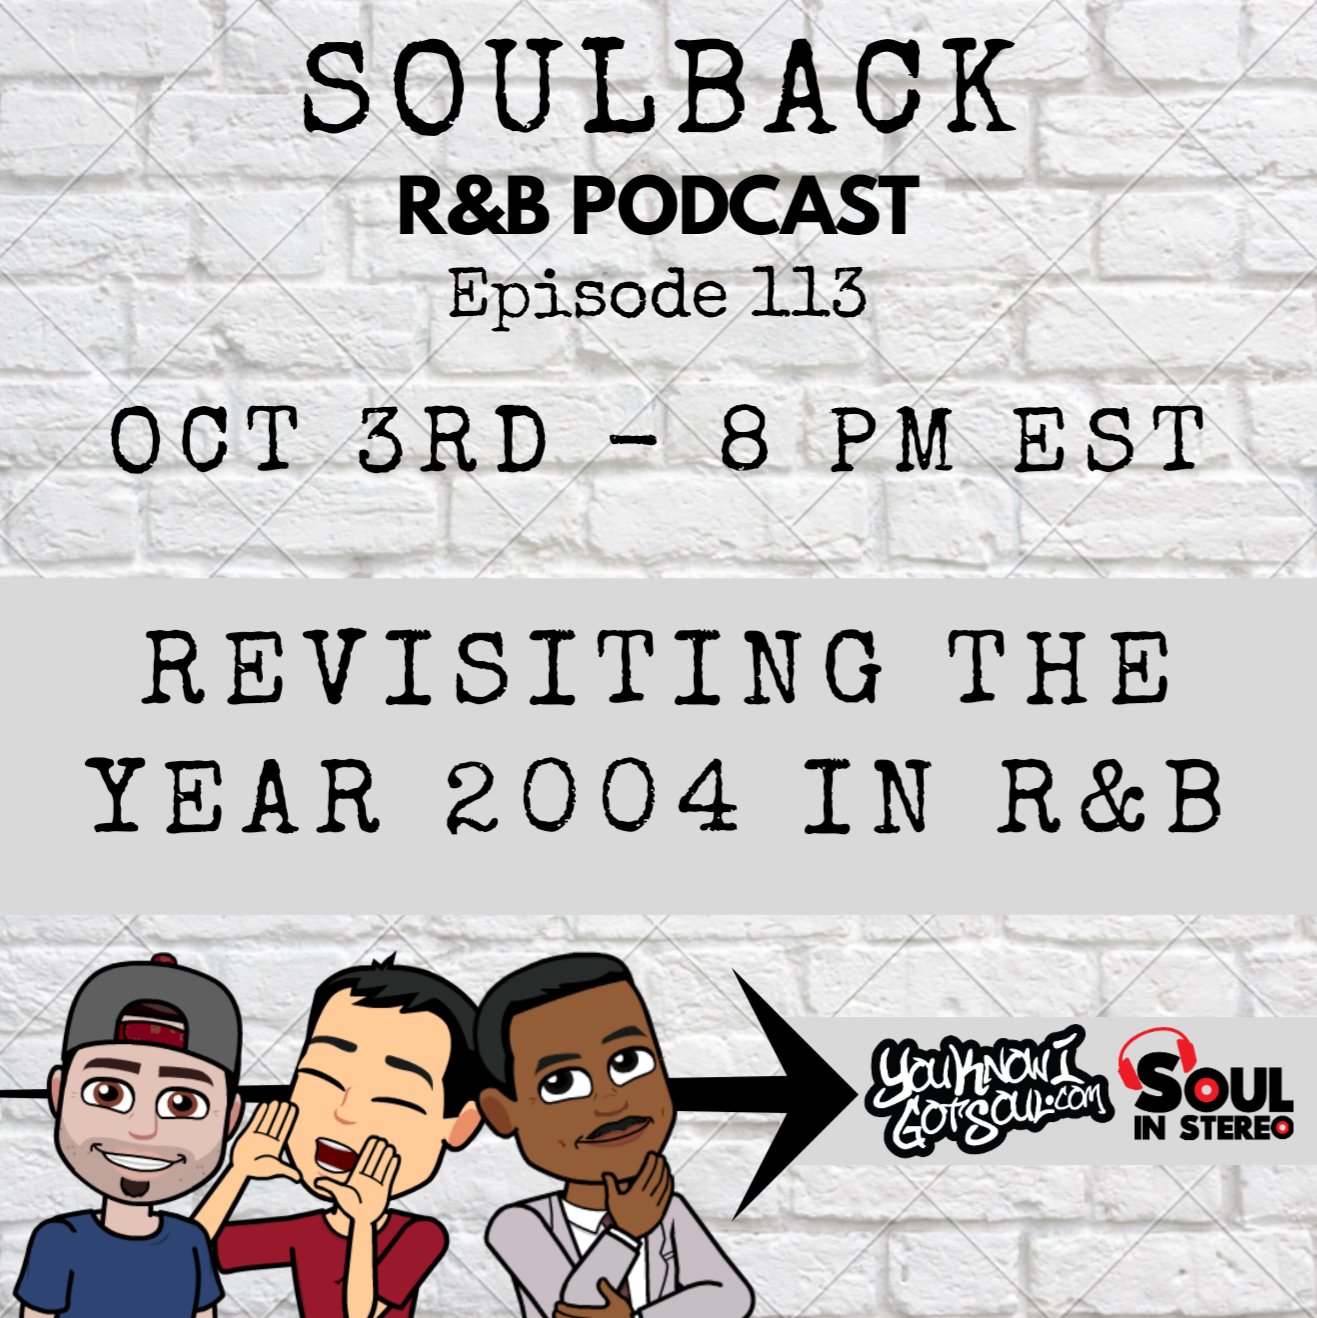 The SoulBack R&B Podcast: Episode 113 *Revisiting The Year 2004 In R&B*